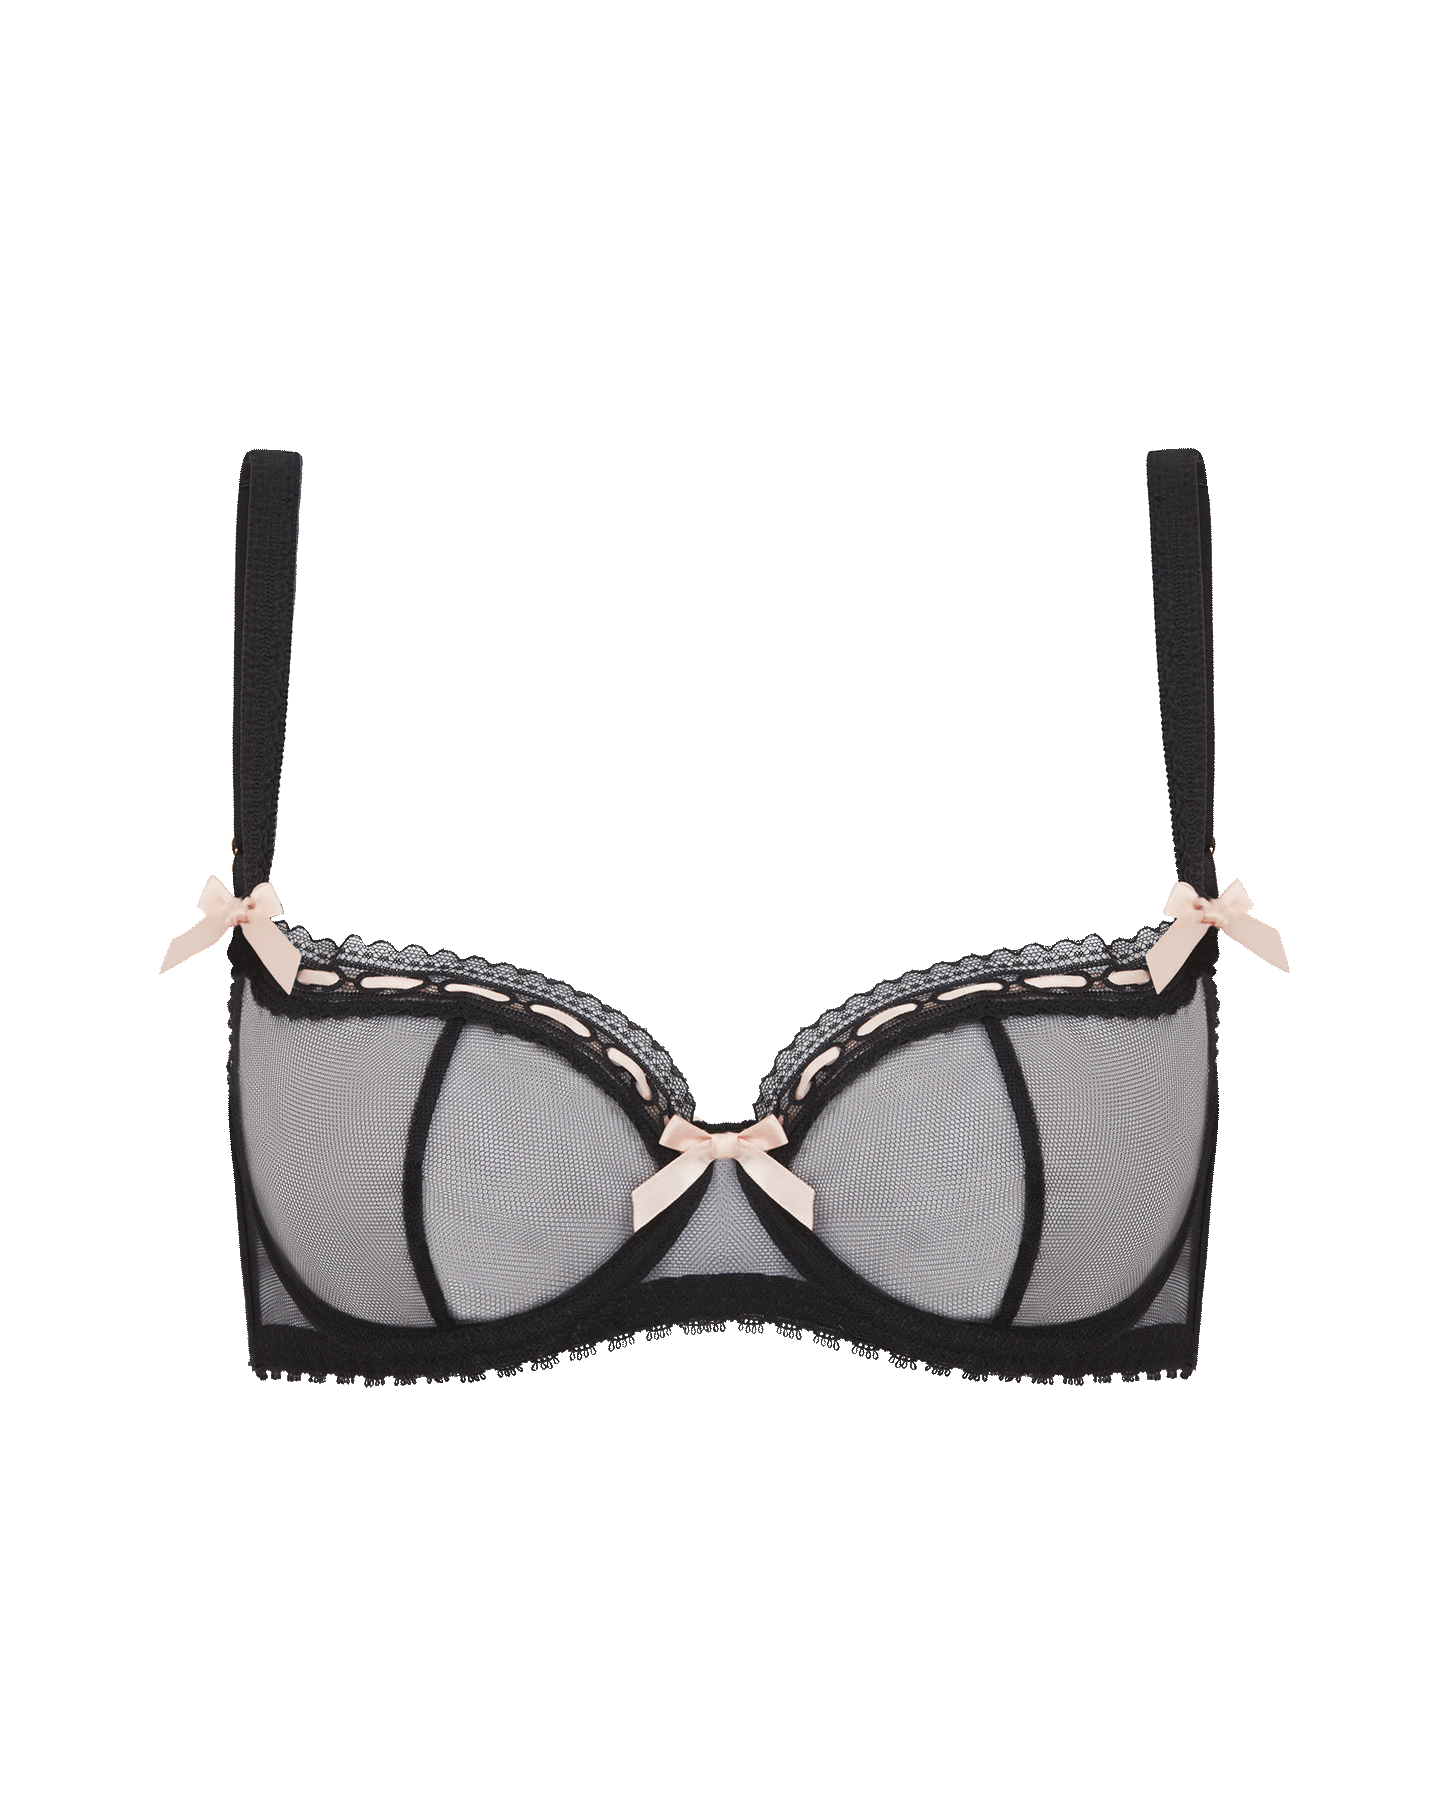 L'AGENT By AGENT PROVOCATEUR Isi Quarter Cup Bra Black/Cerise BNWT  5055780001018 on eBid Canada